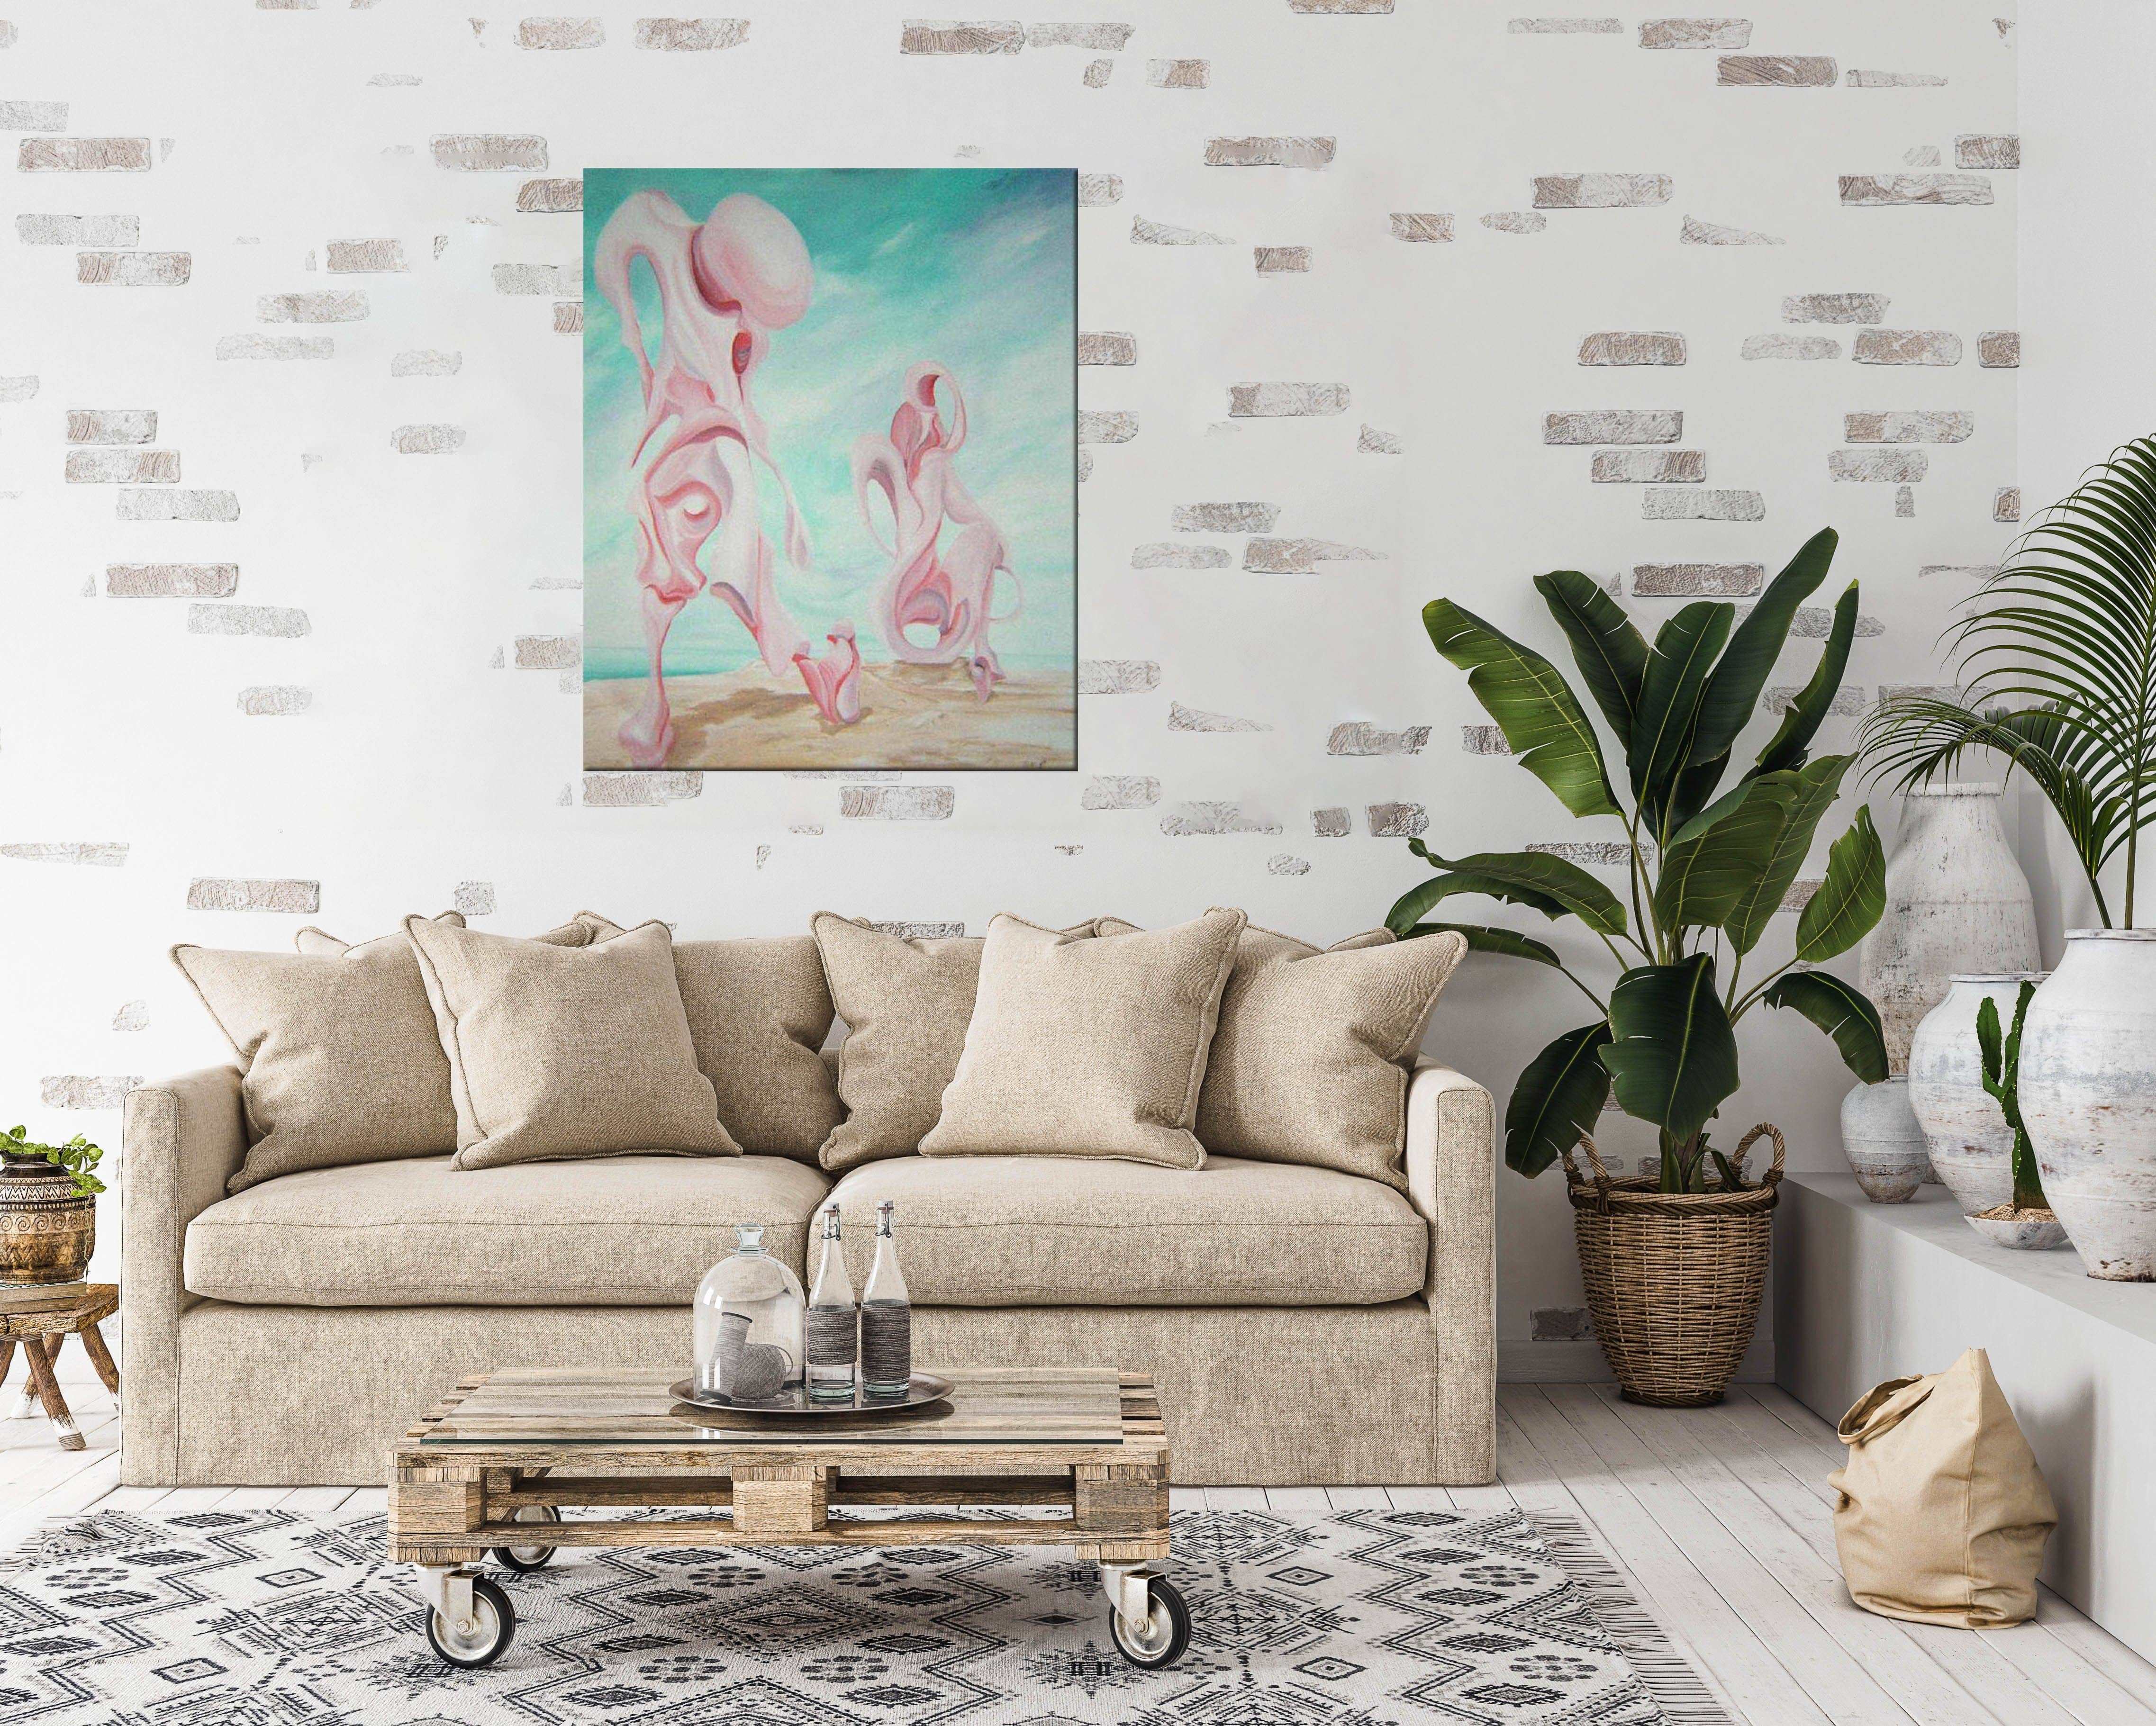 Painting of Flamboyance displayed in a rustic living room on the wall